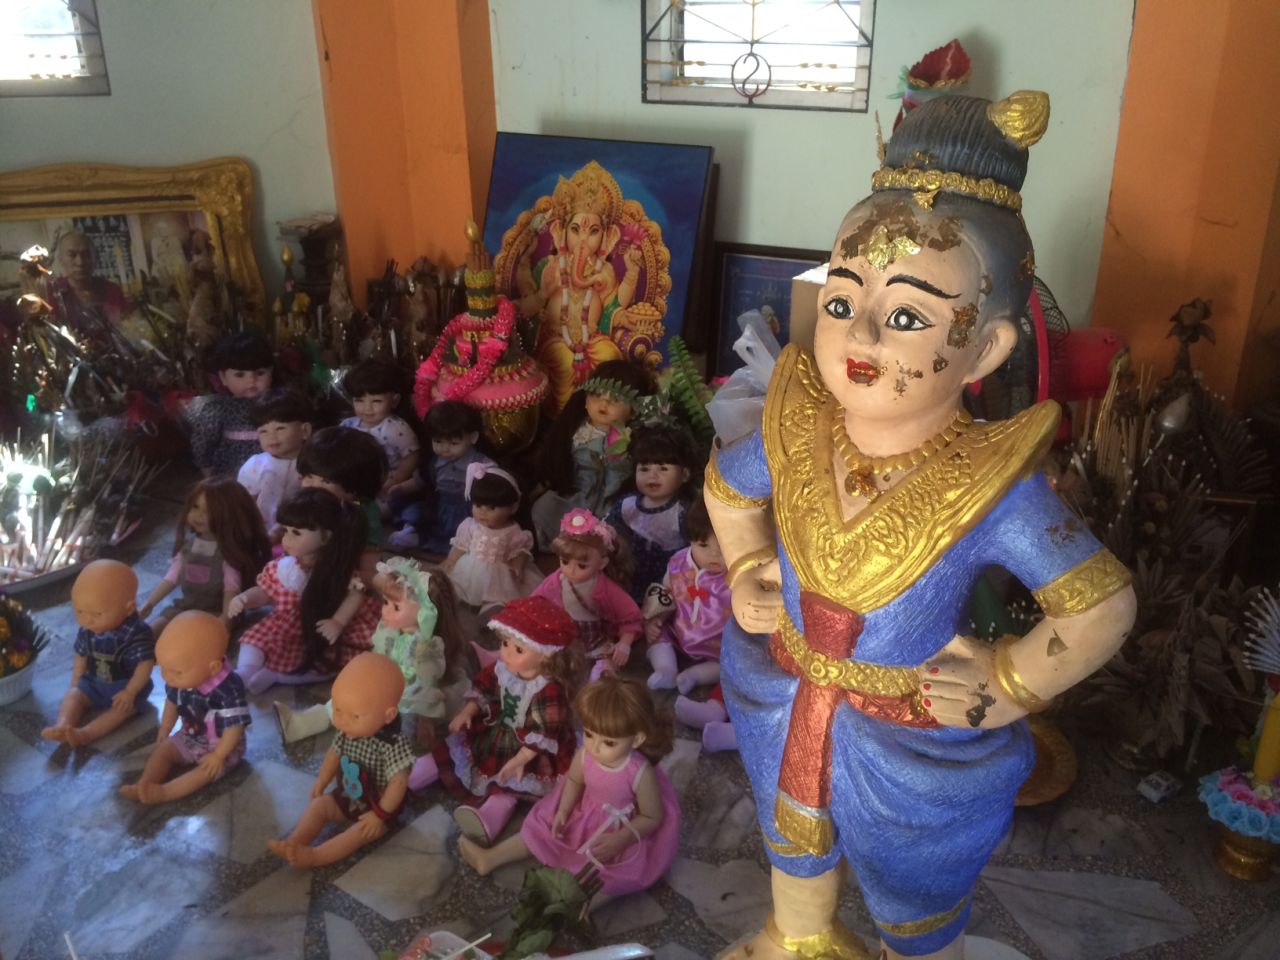 Many dolls have been brought here to the temple, where they can be shown due respect. 